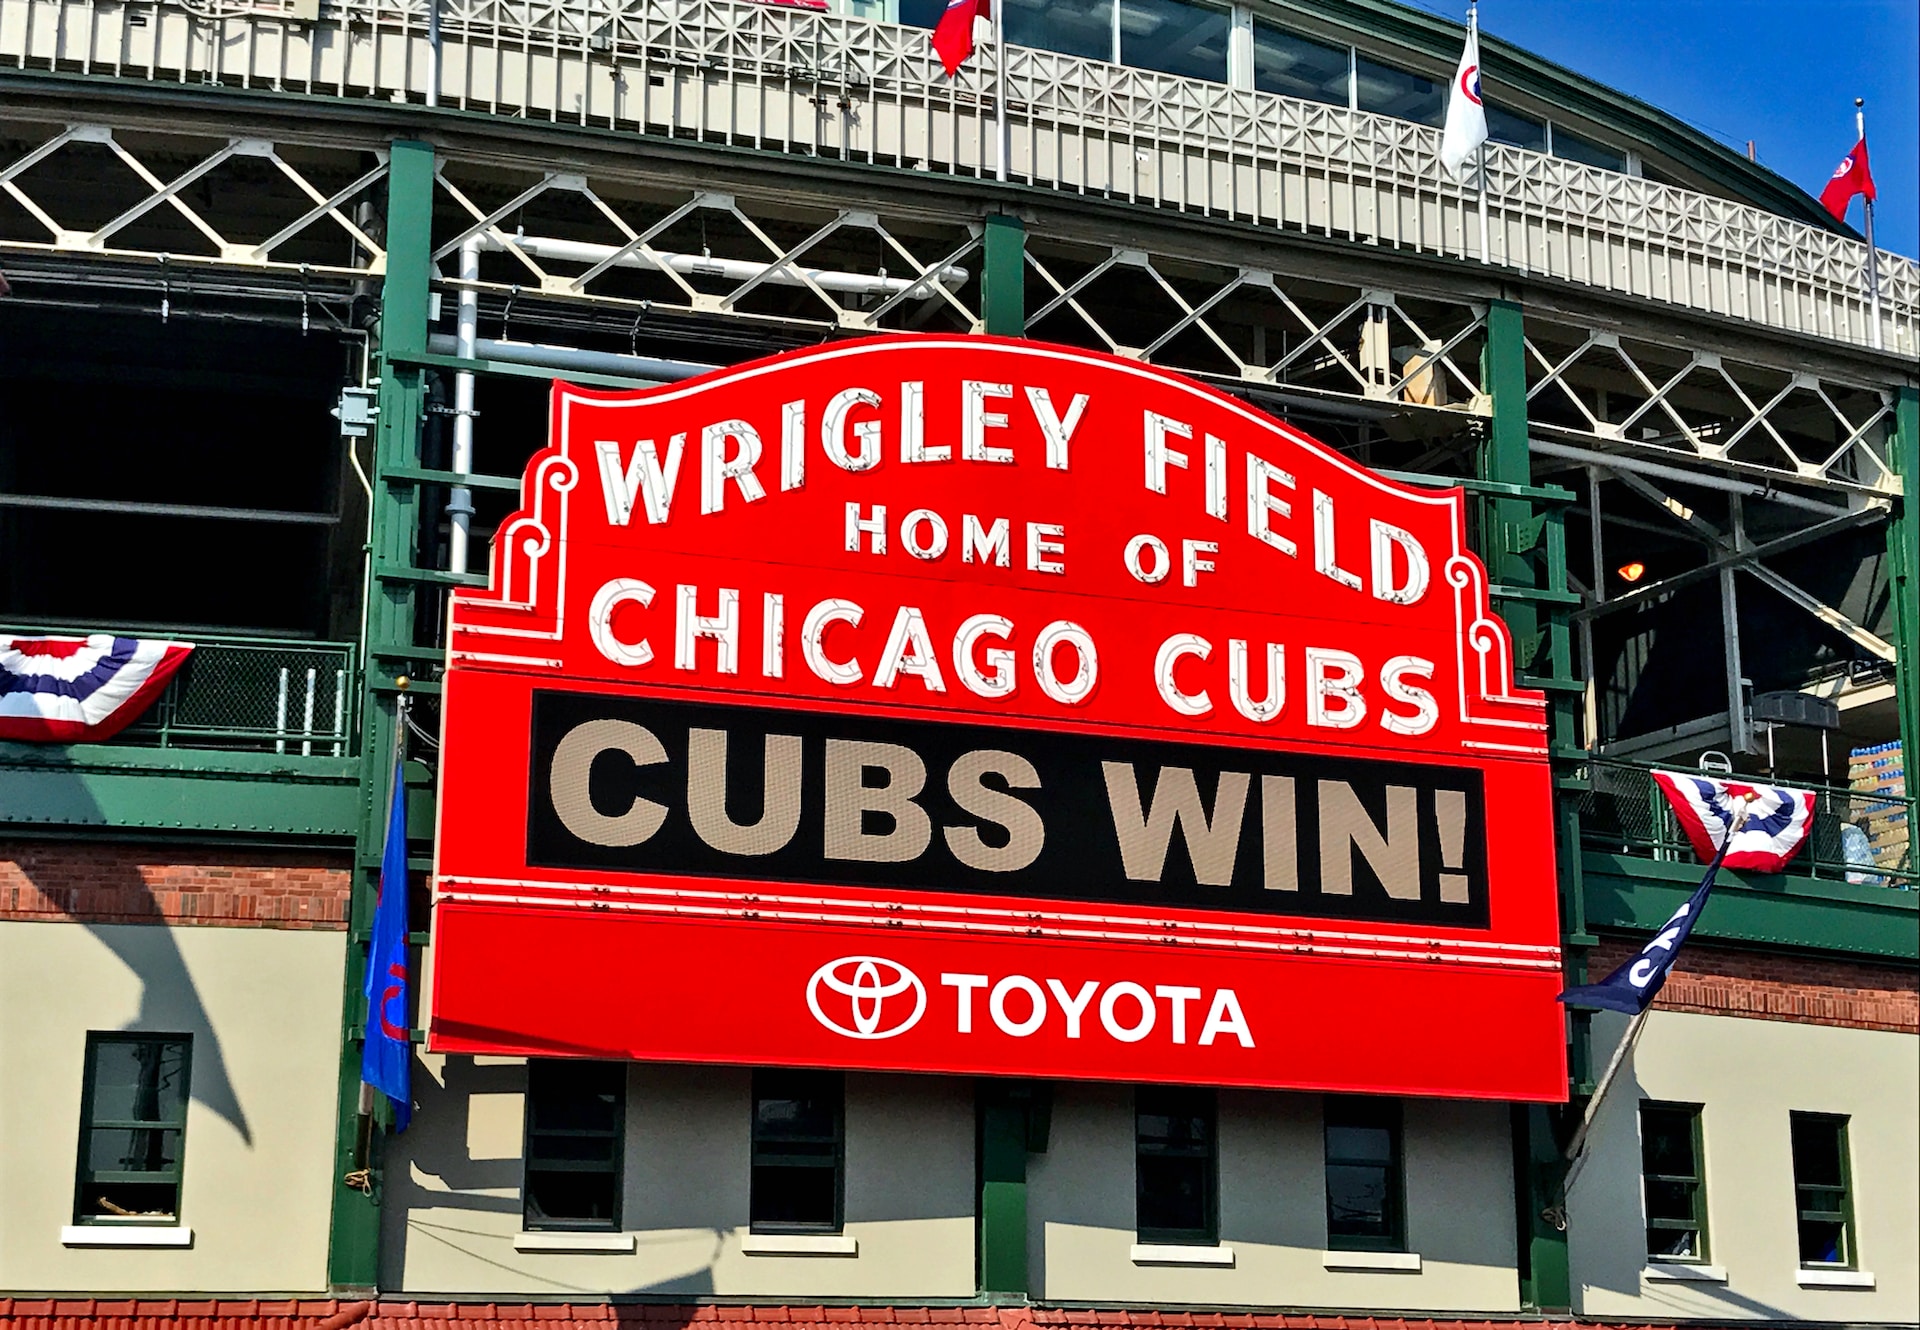 Things To Do In Chicago - Wrigley Field